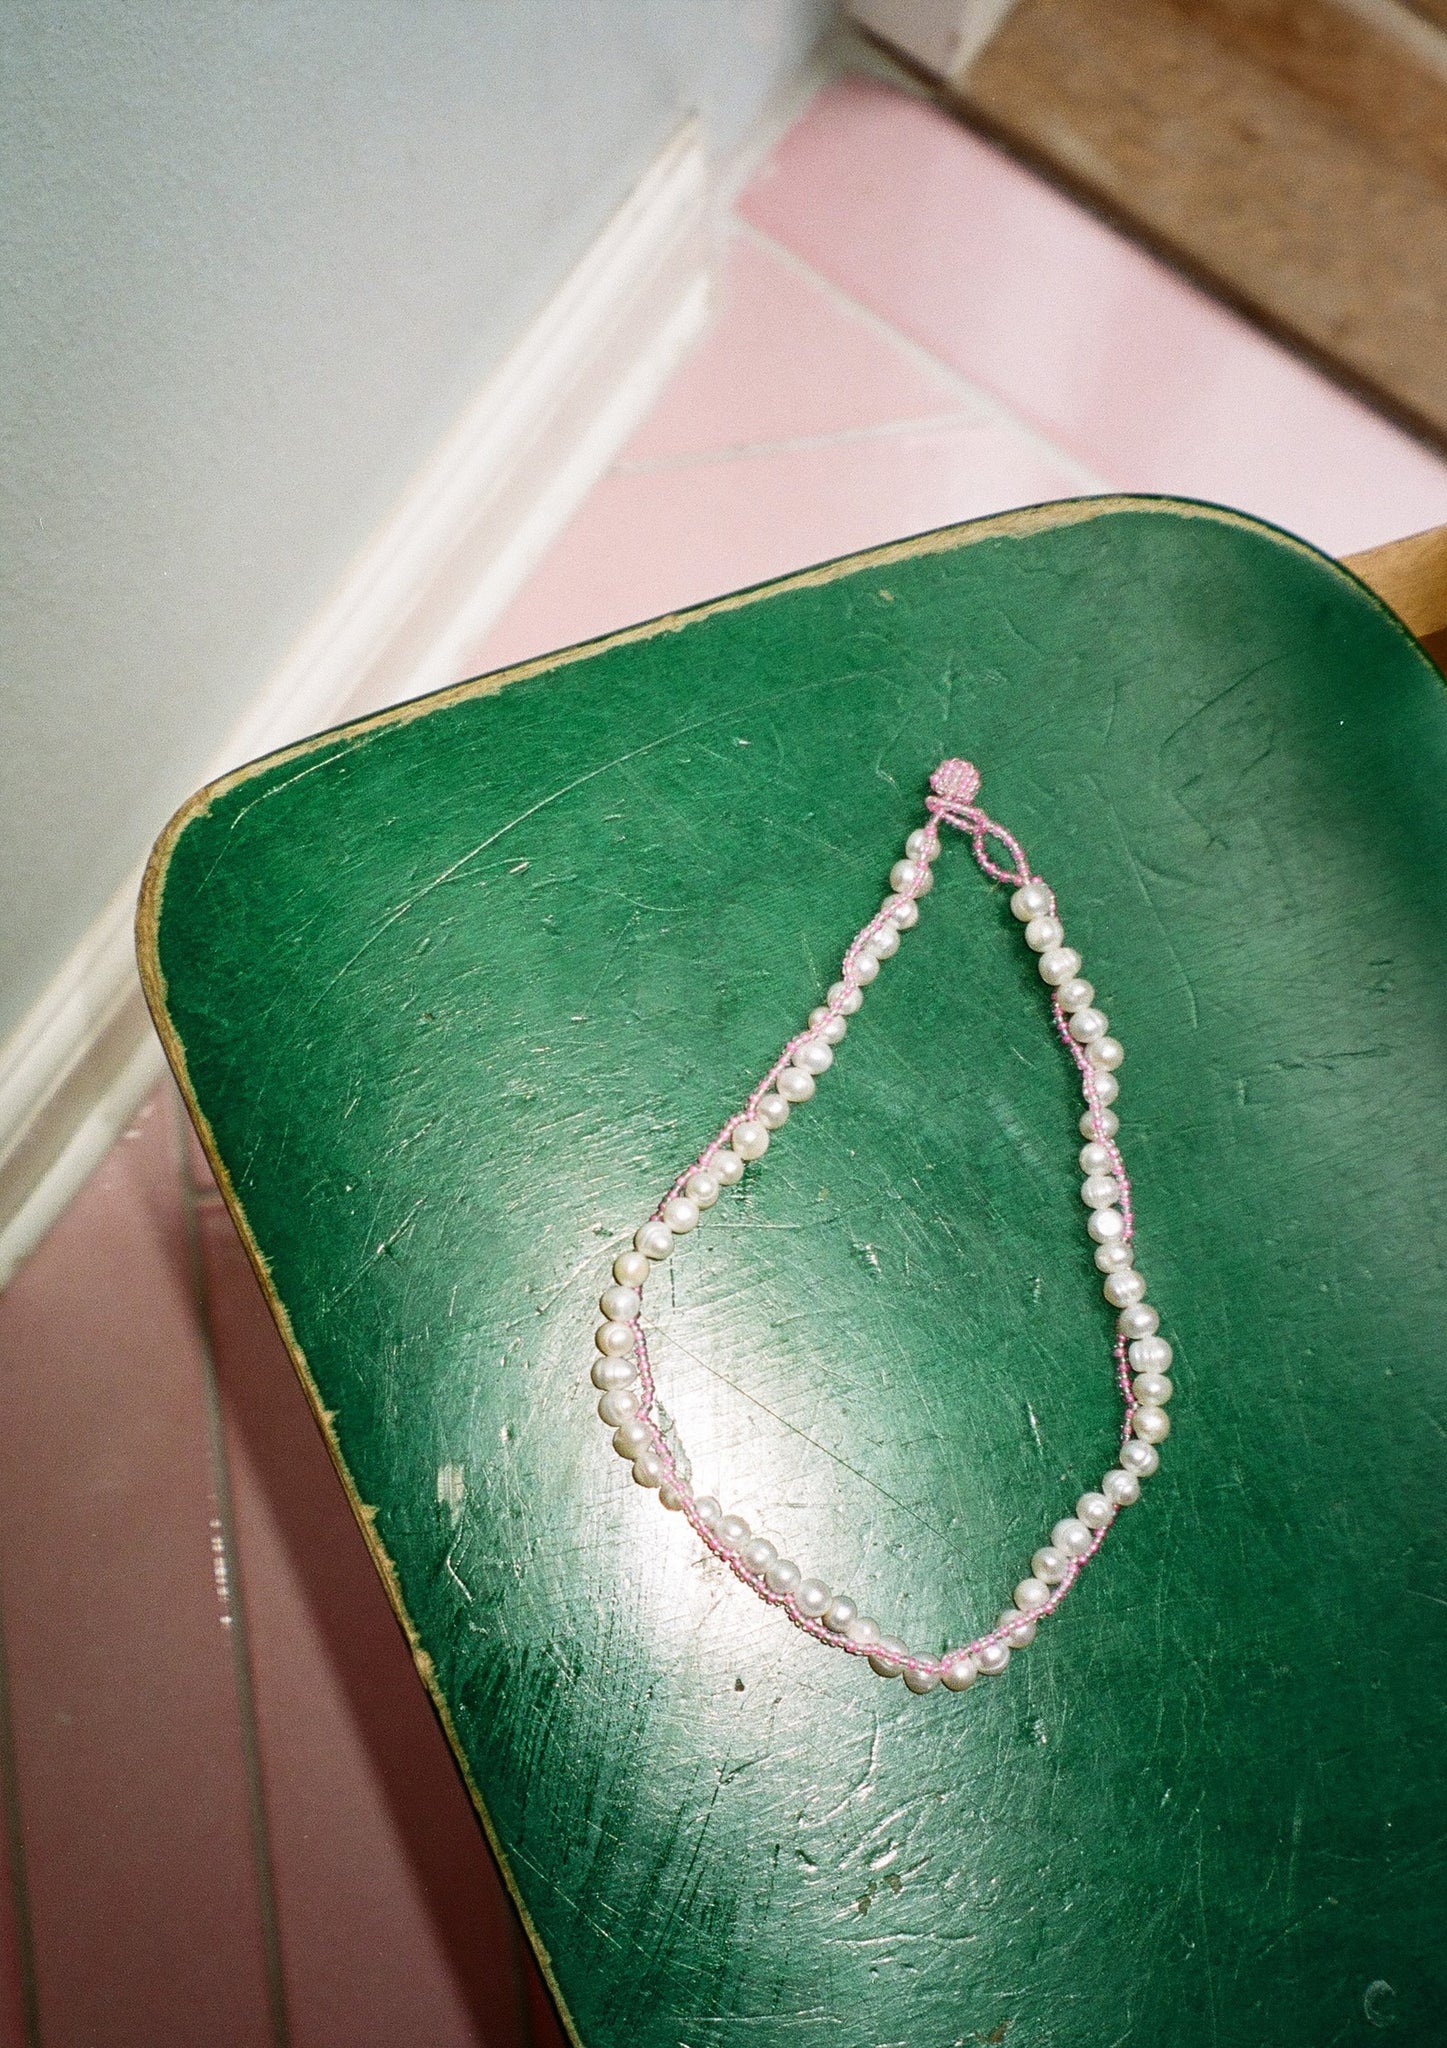 Twisted Pearl Pink Necklace